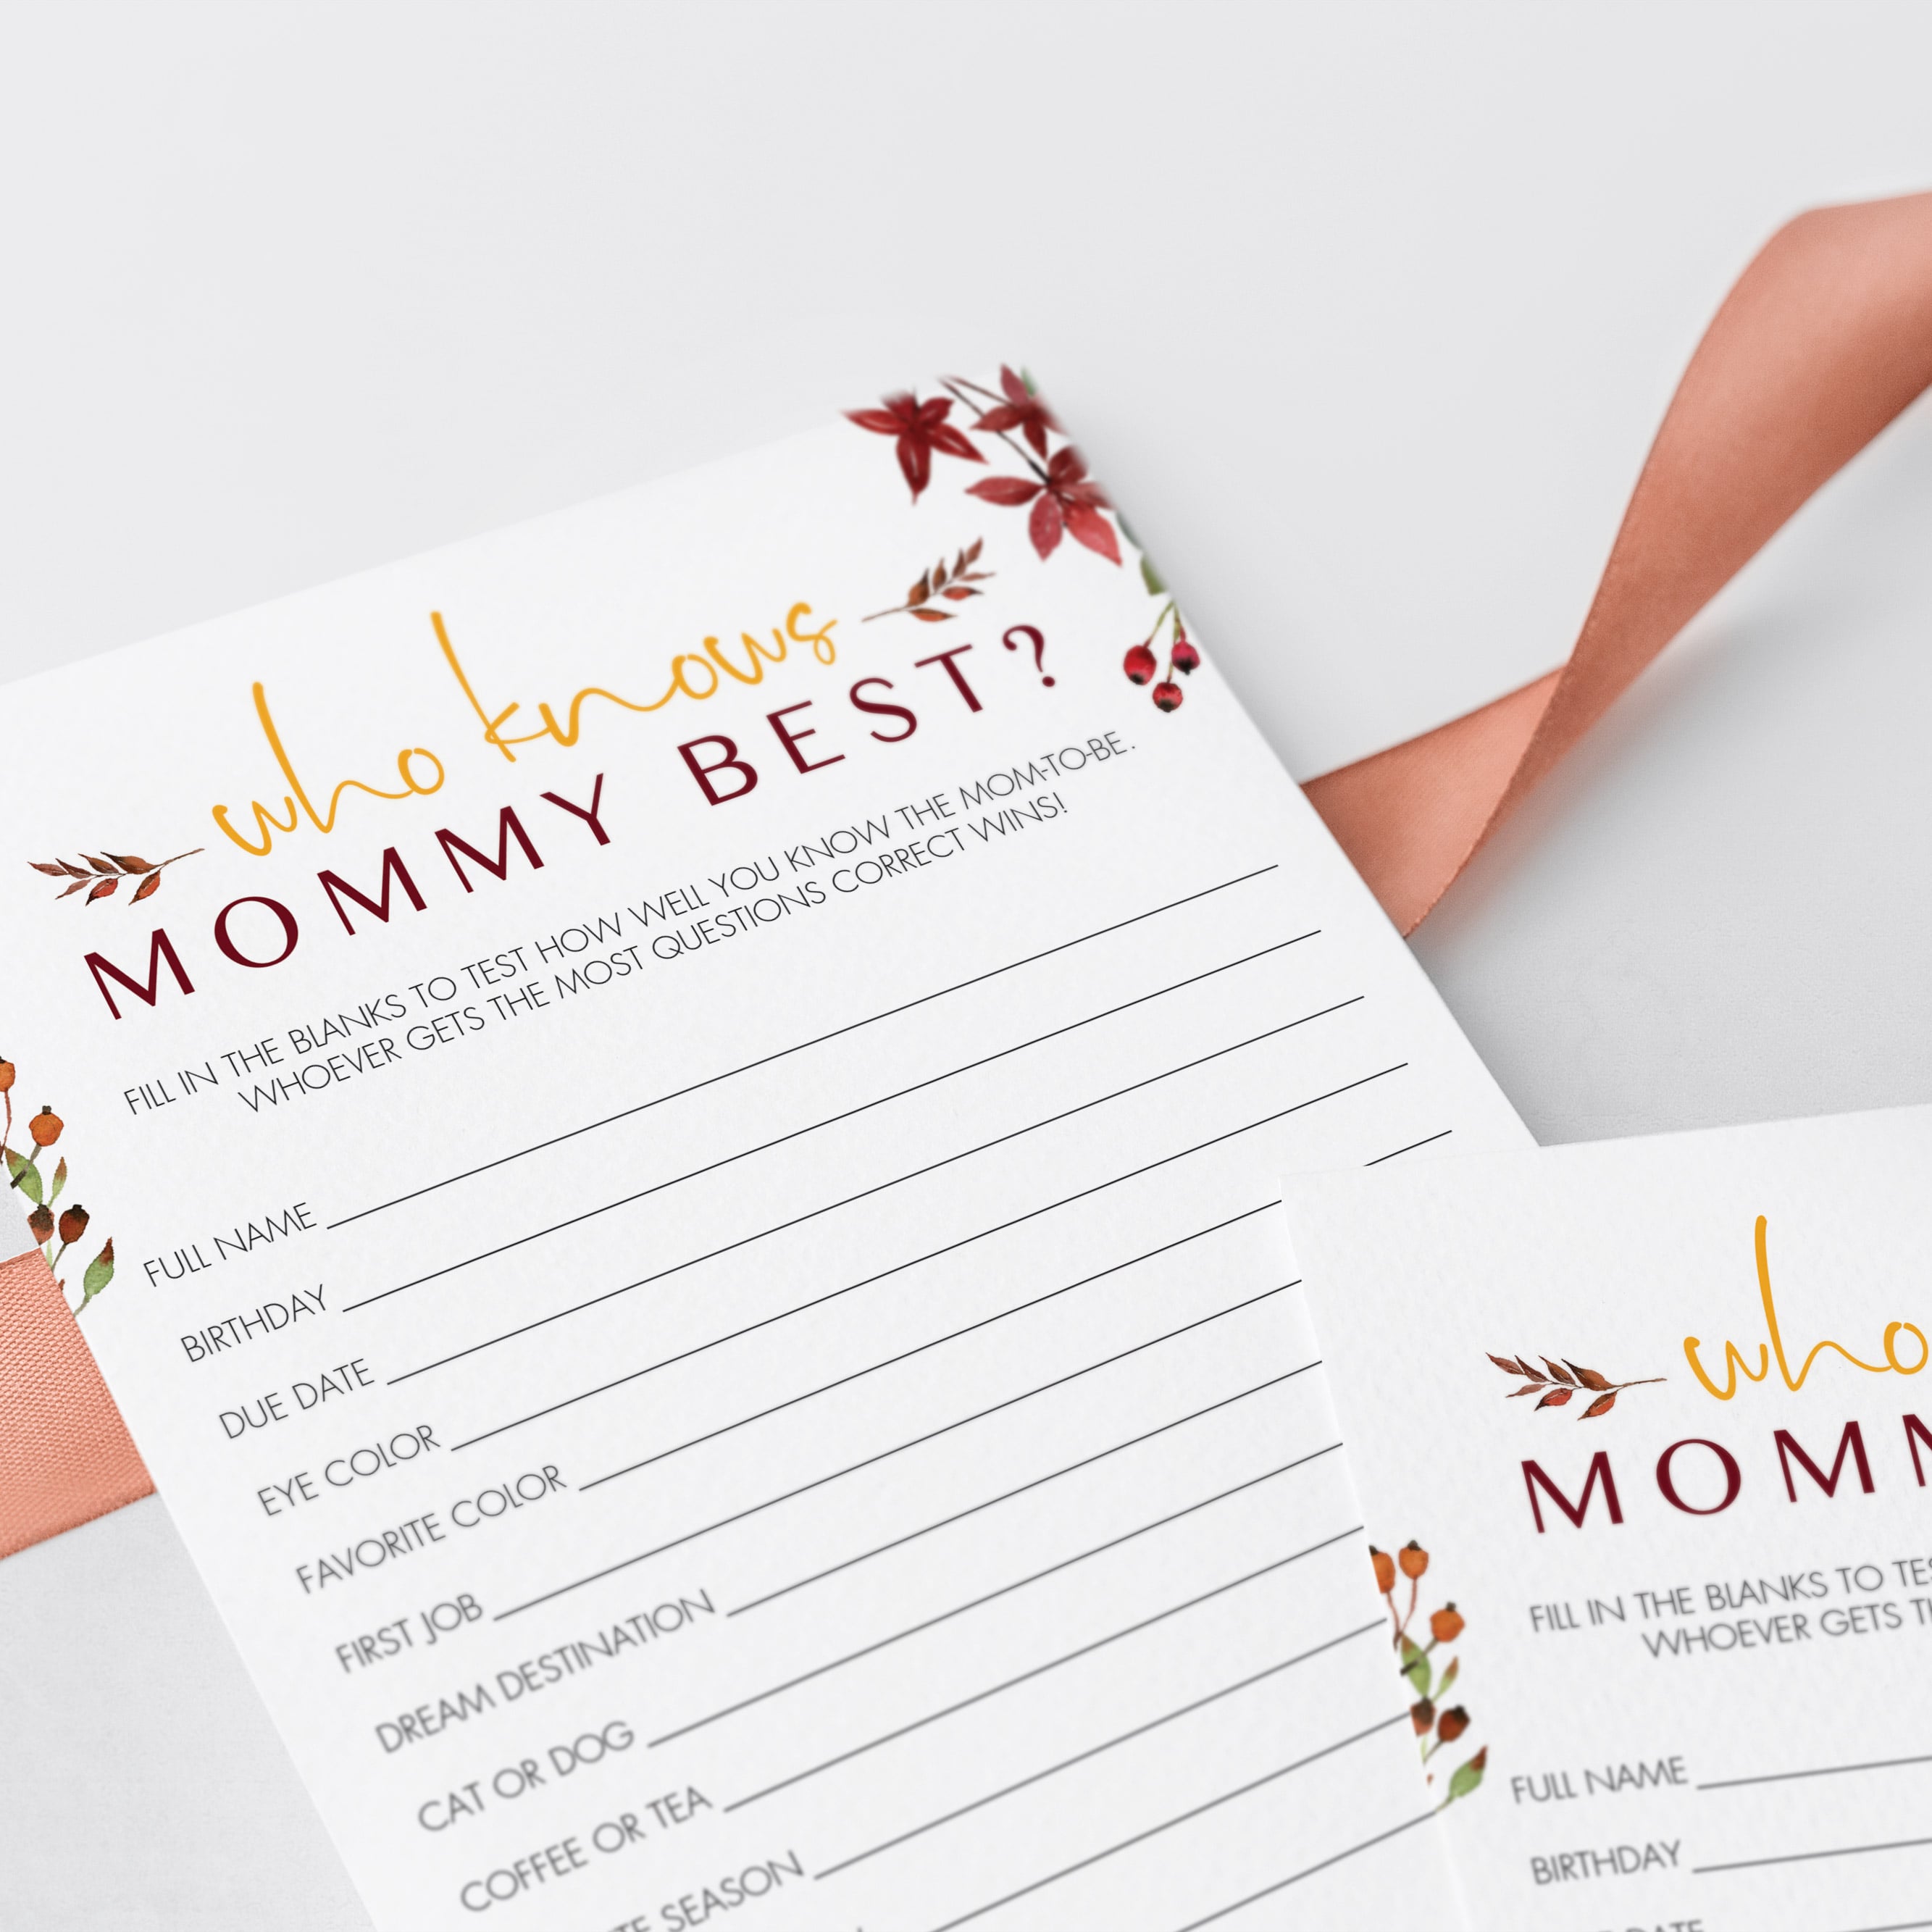 Burgundy who knows mom best baby shower game printable by LittleSizzle